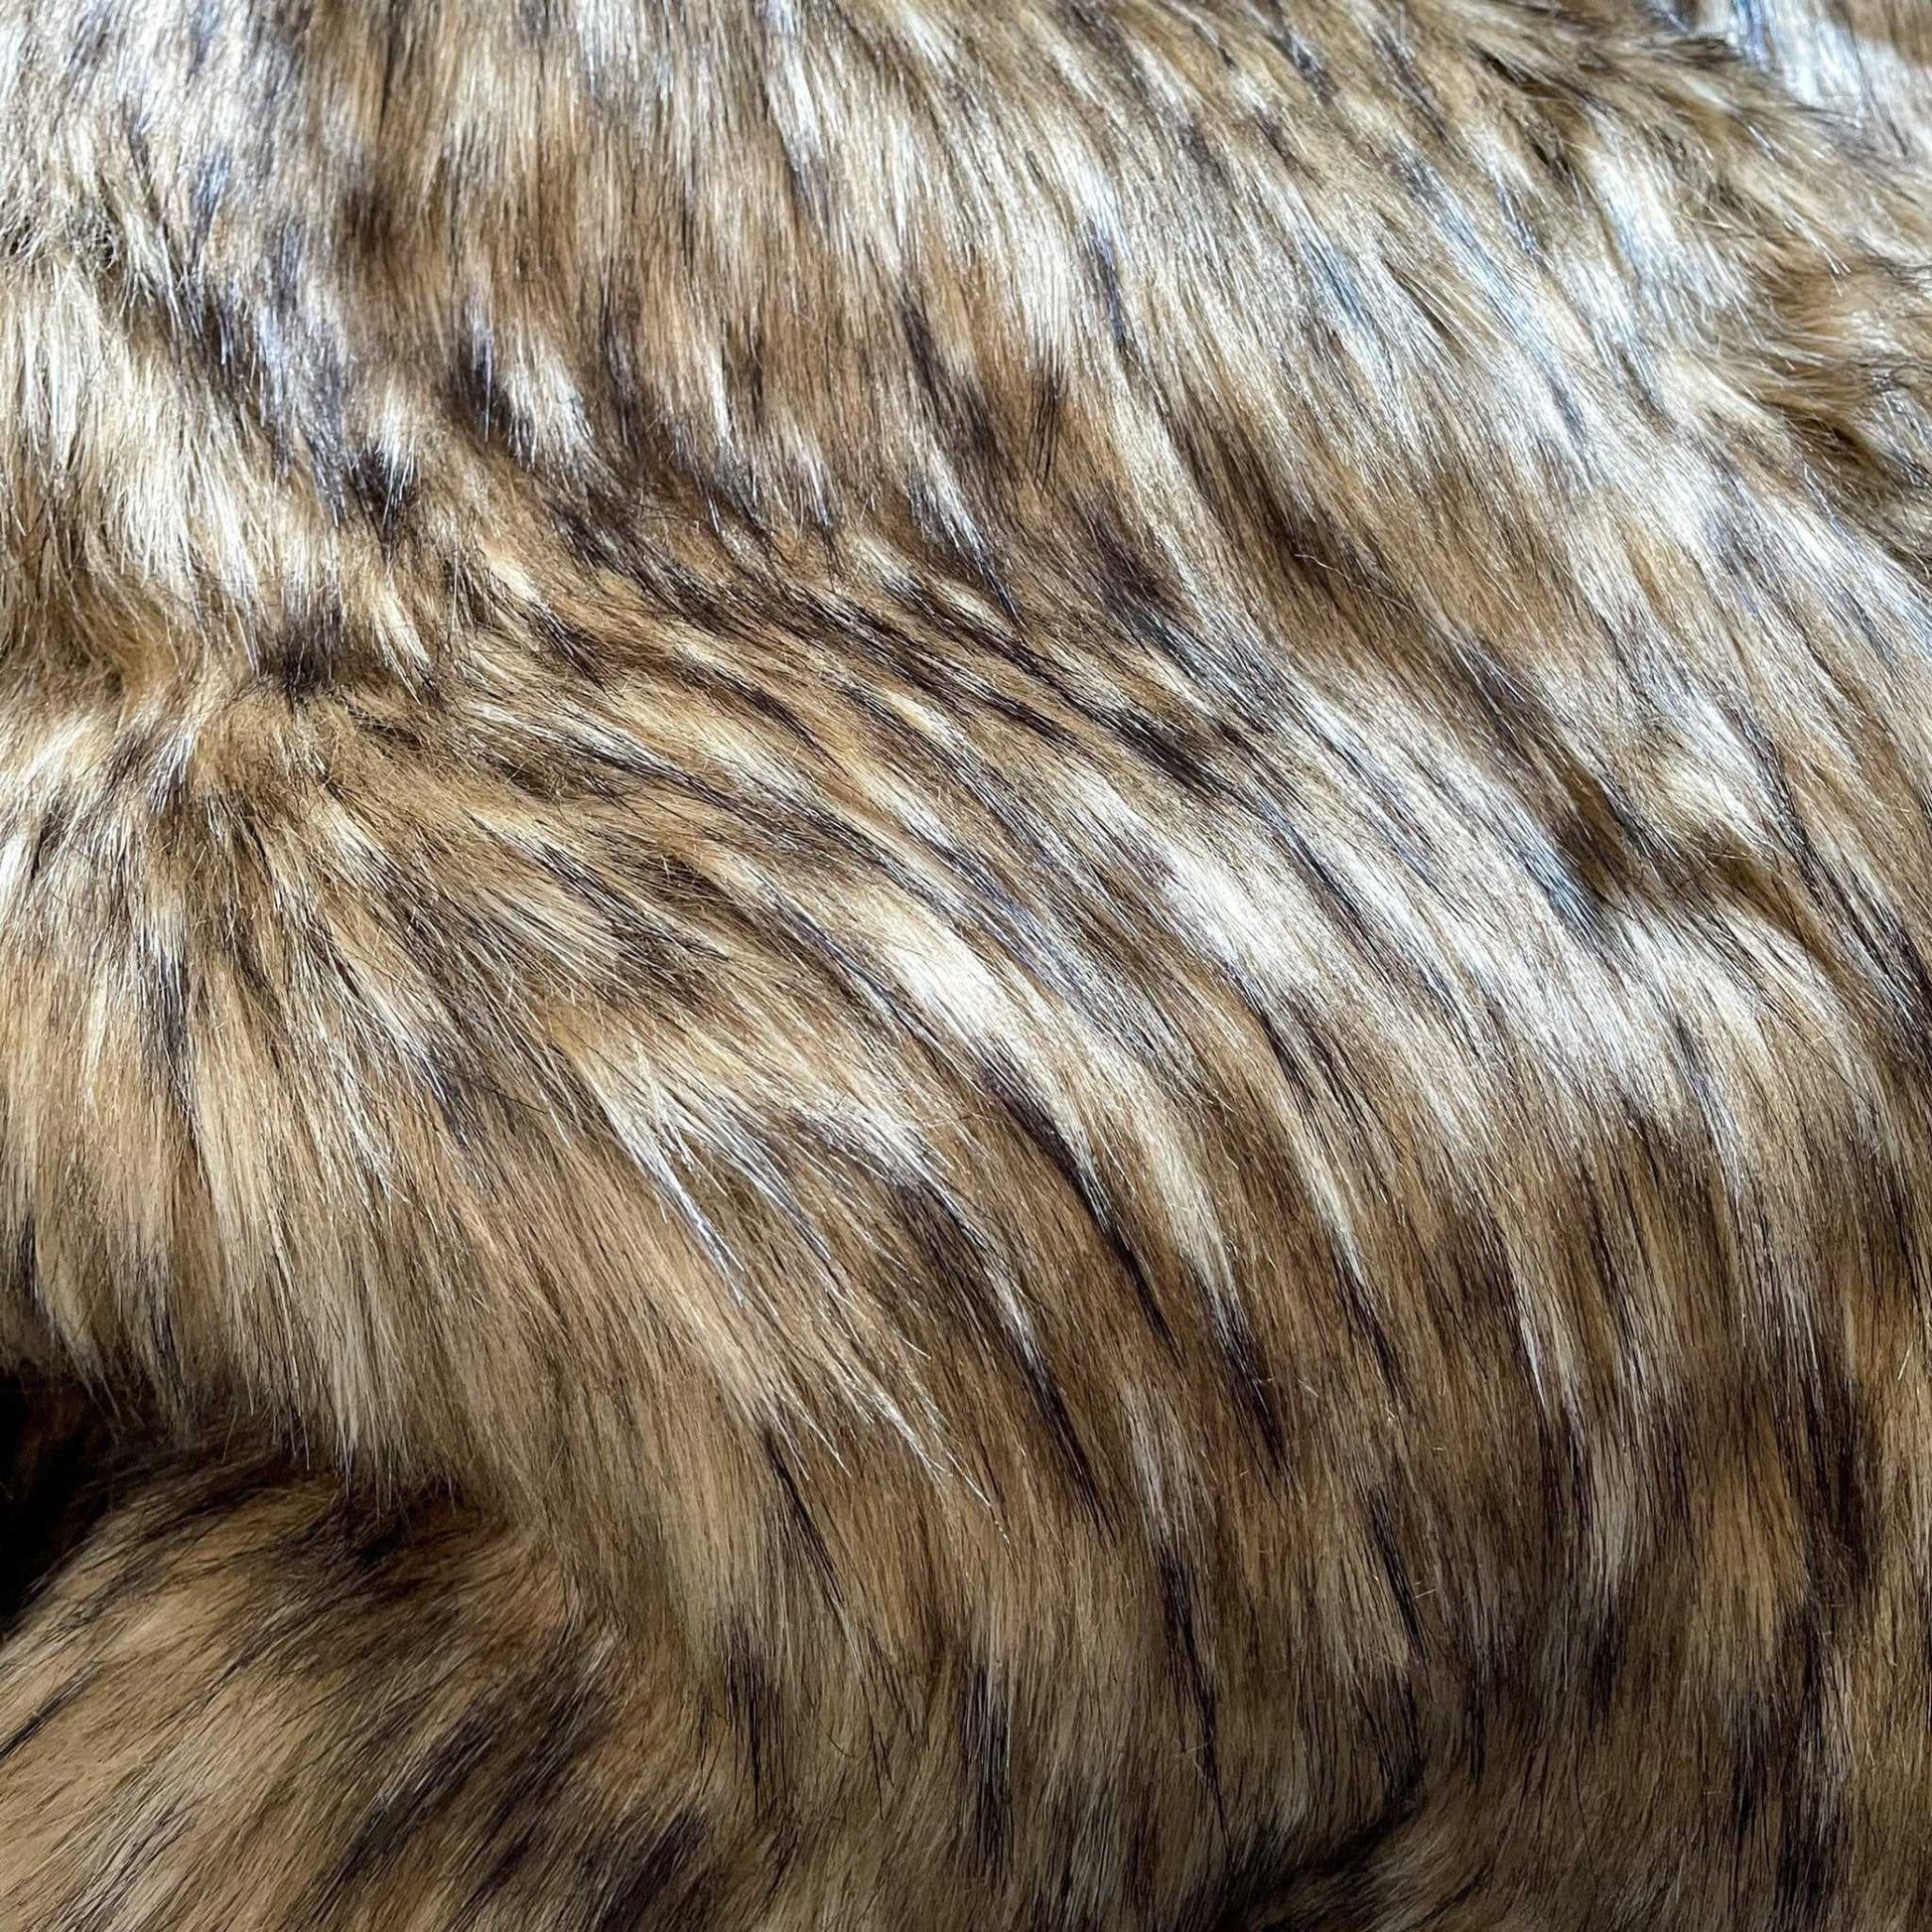 Wildcat Faux Fur Fabric by the Yard or Meter | Brown, Tan, Caramel Pompom, Arts & Crafts, Decor, Costume Faux Fur Fabric 3 $ Buttons & Beans Co.